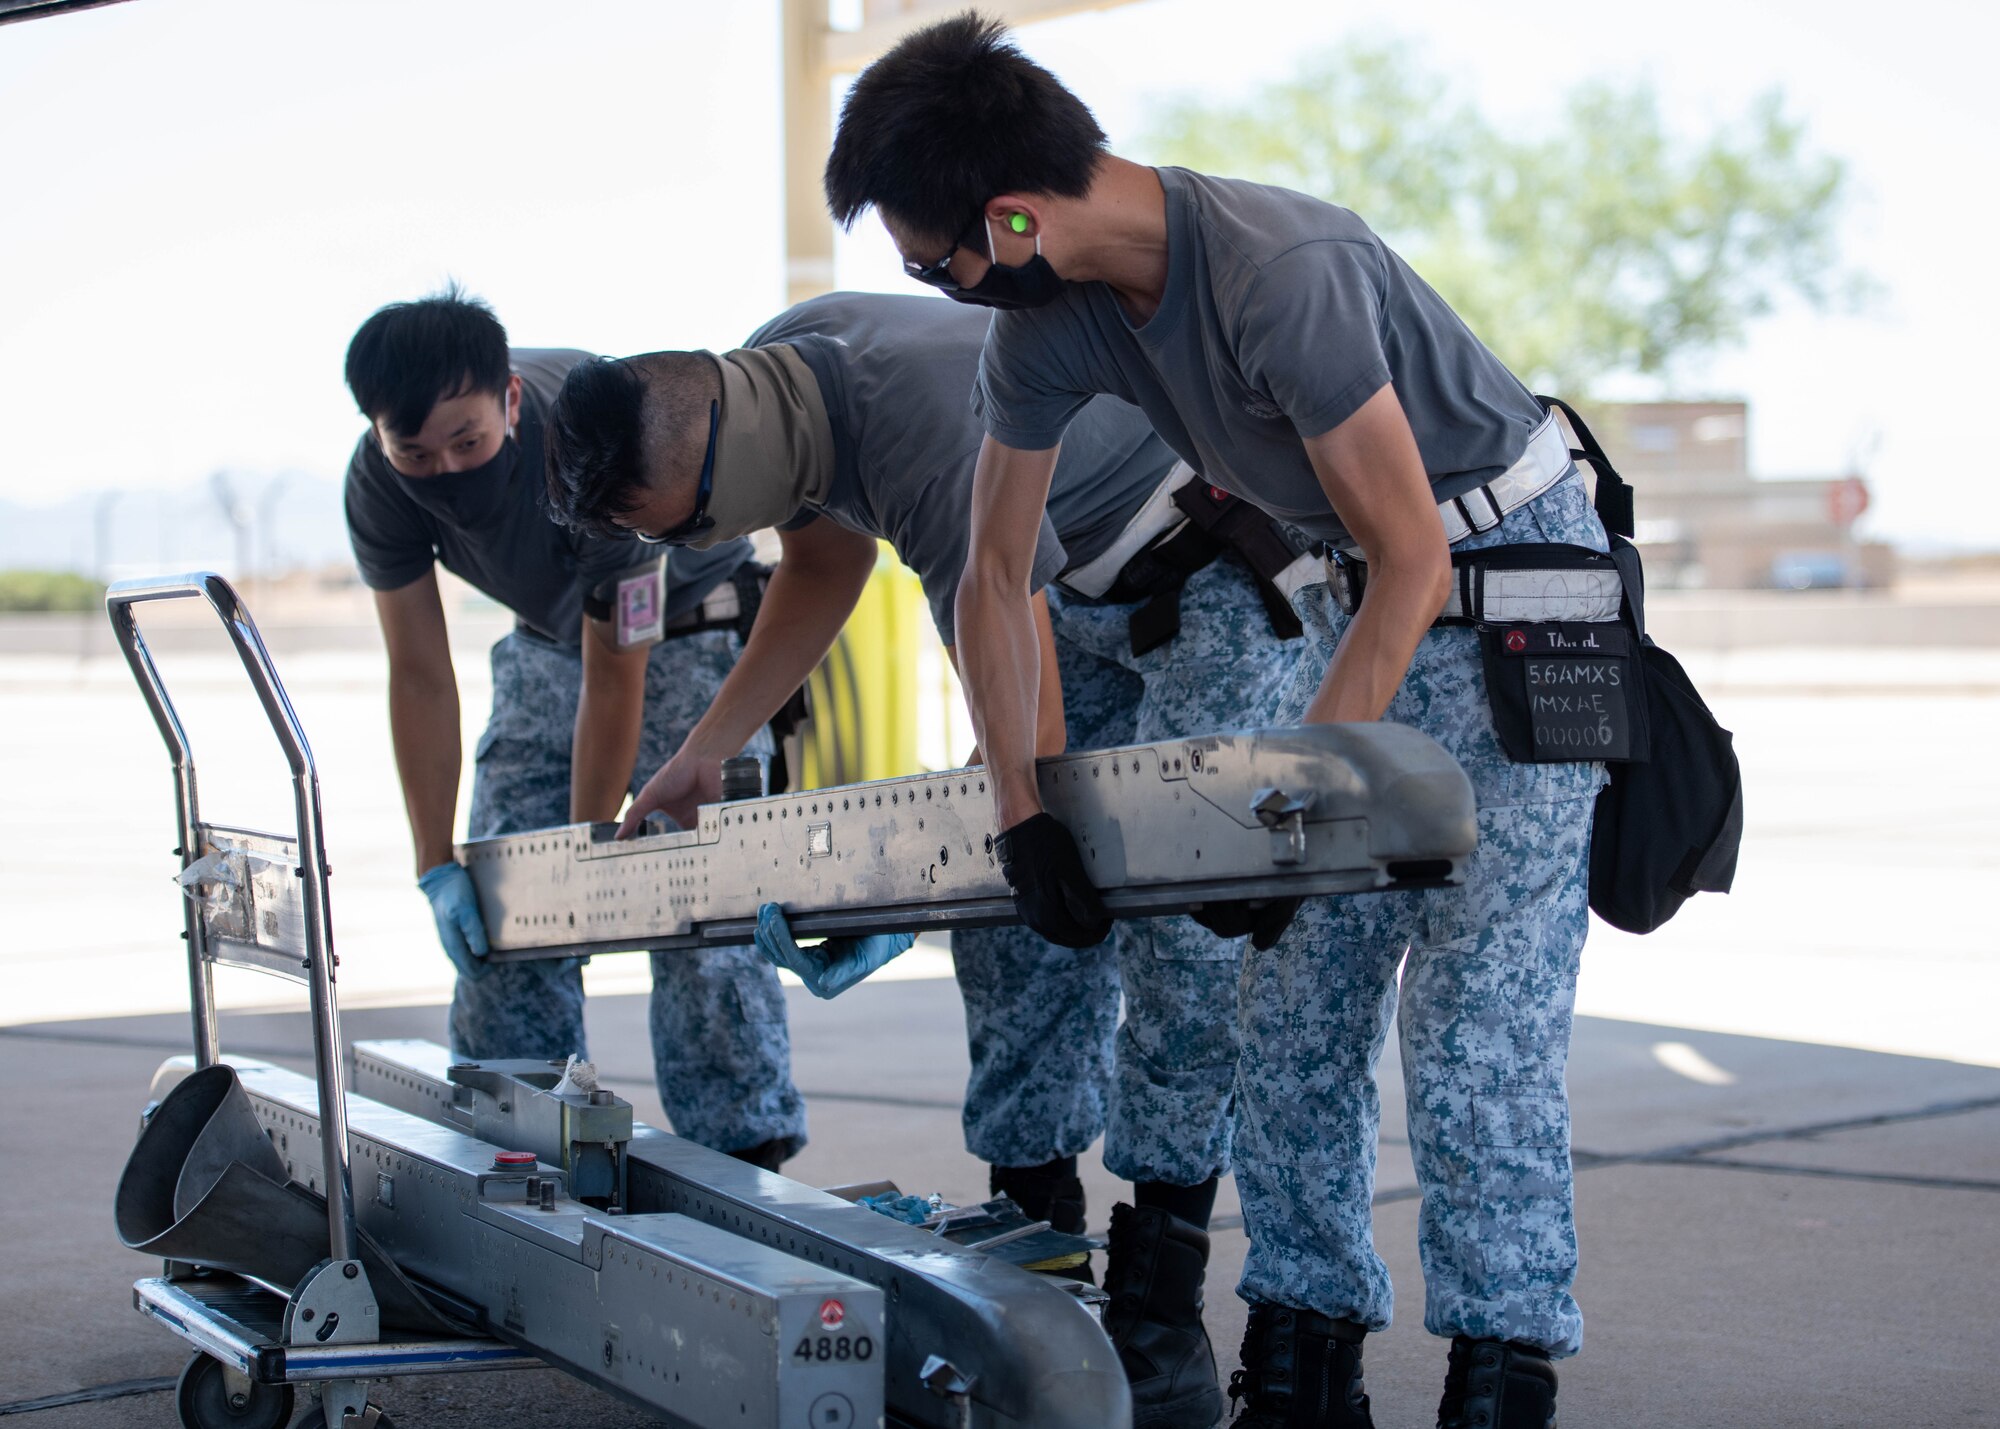 From left to right, Republic of Singapore Air Force Military Expert One Staff Sgt. Chan Jun Heng Andy, Military Expert Two Master Sgt. Teo Choh Hwai, and ME2 Master Sgt. Tan Hock Leng, 425th Fighter Squadron maintainers, prepare to install an LAU-129 missile onto an F-16D Fighting Falcon Aug. 5, 2020, at Luke Air Force Base, Ariz.